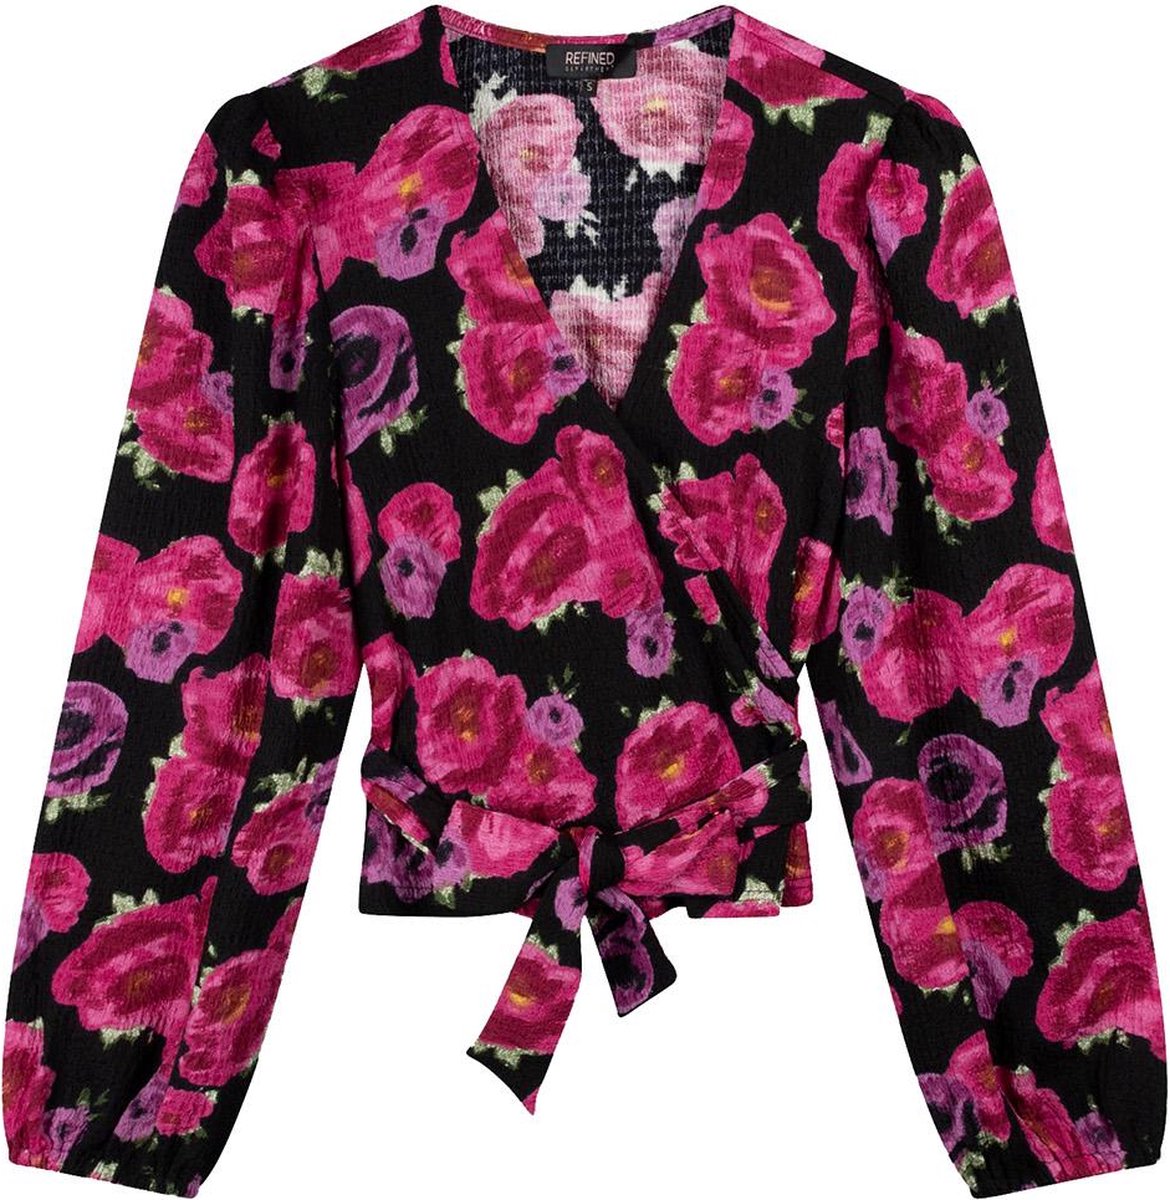 Refined Department Blouse Ladies Knitted Wrap Top R2401837403 Vaira 955 Flower Dames Maat - M